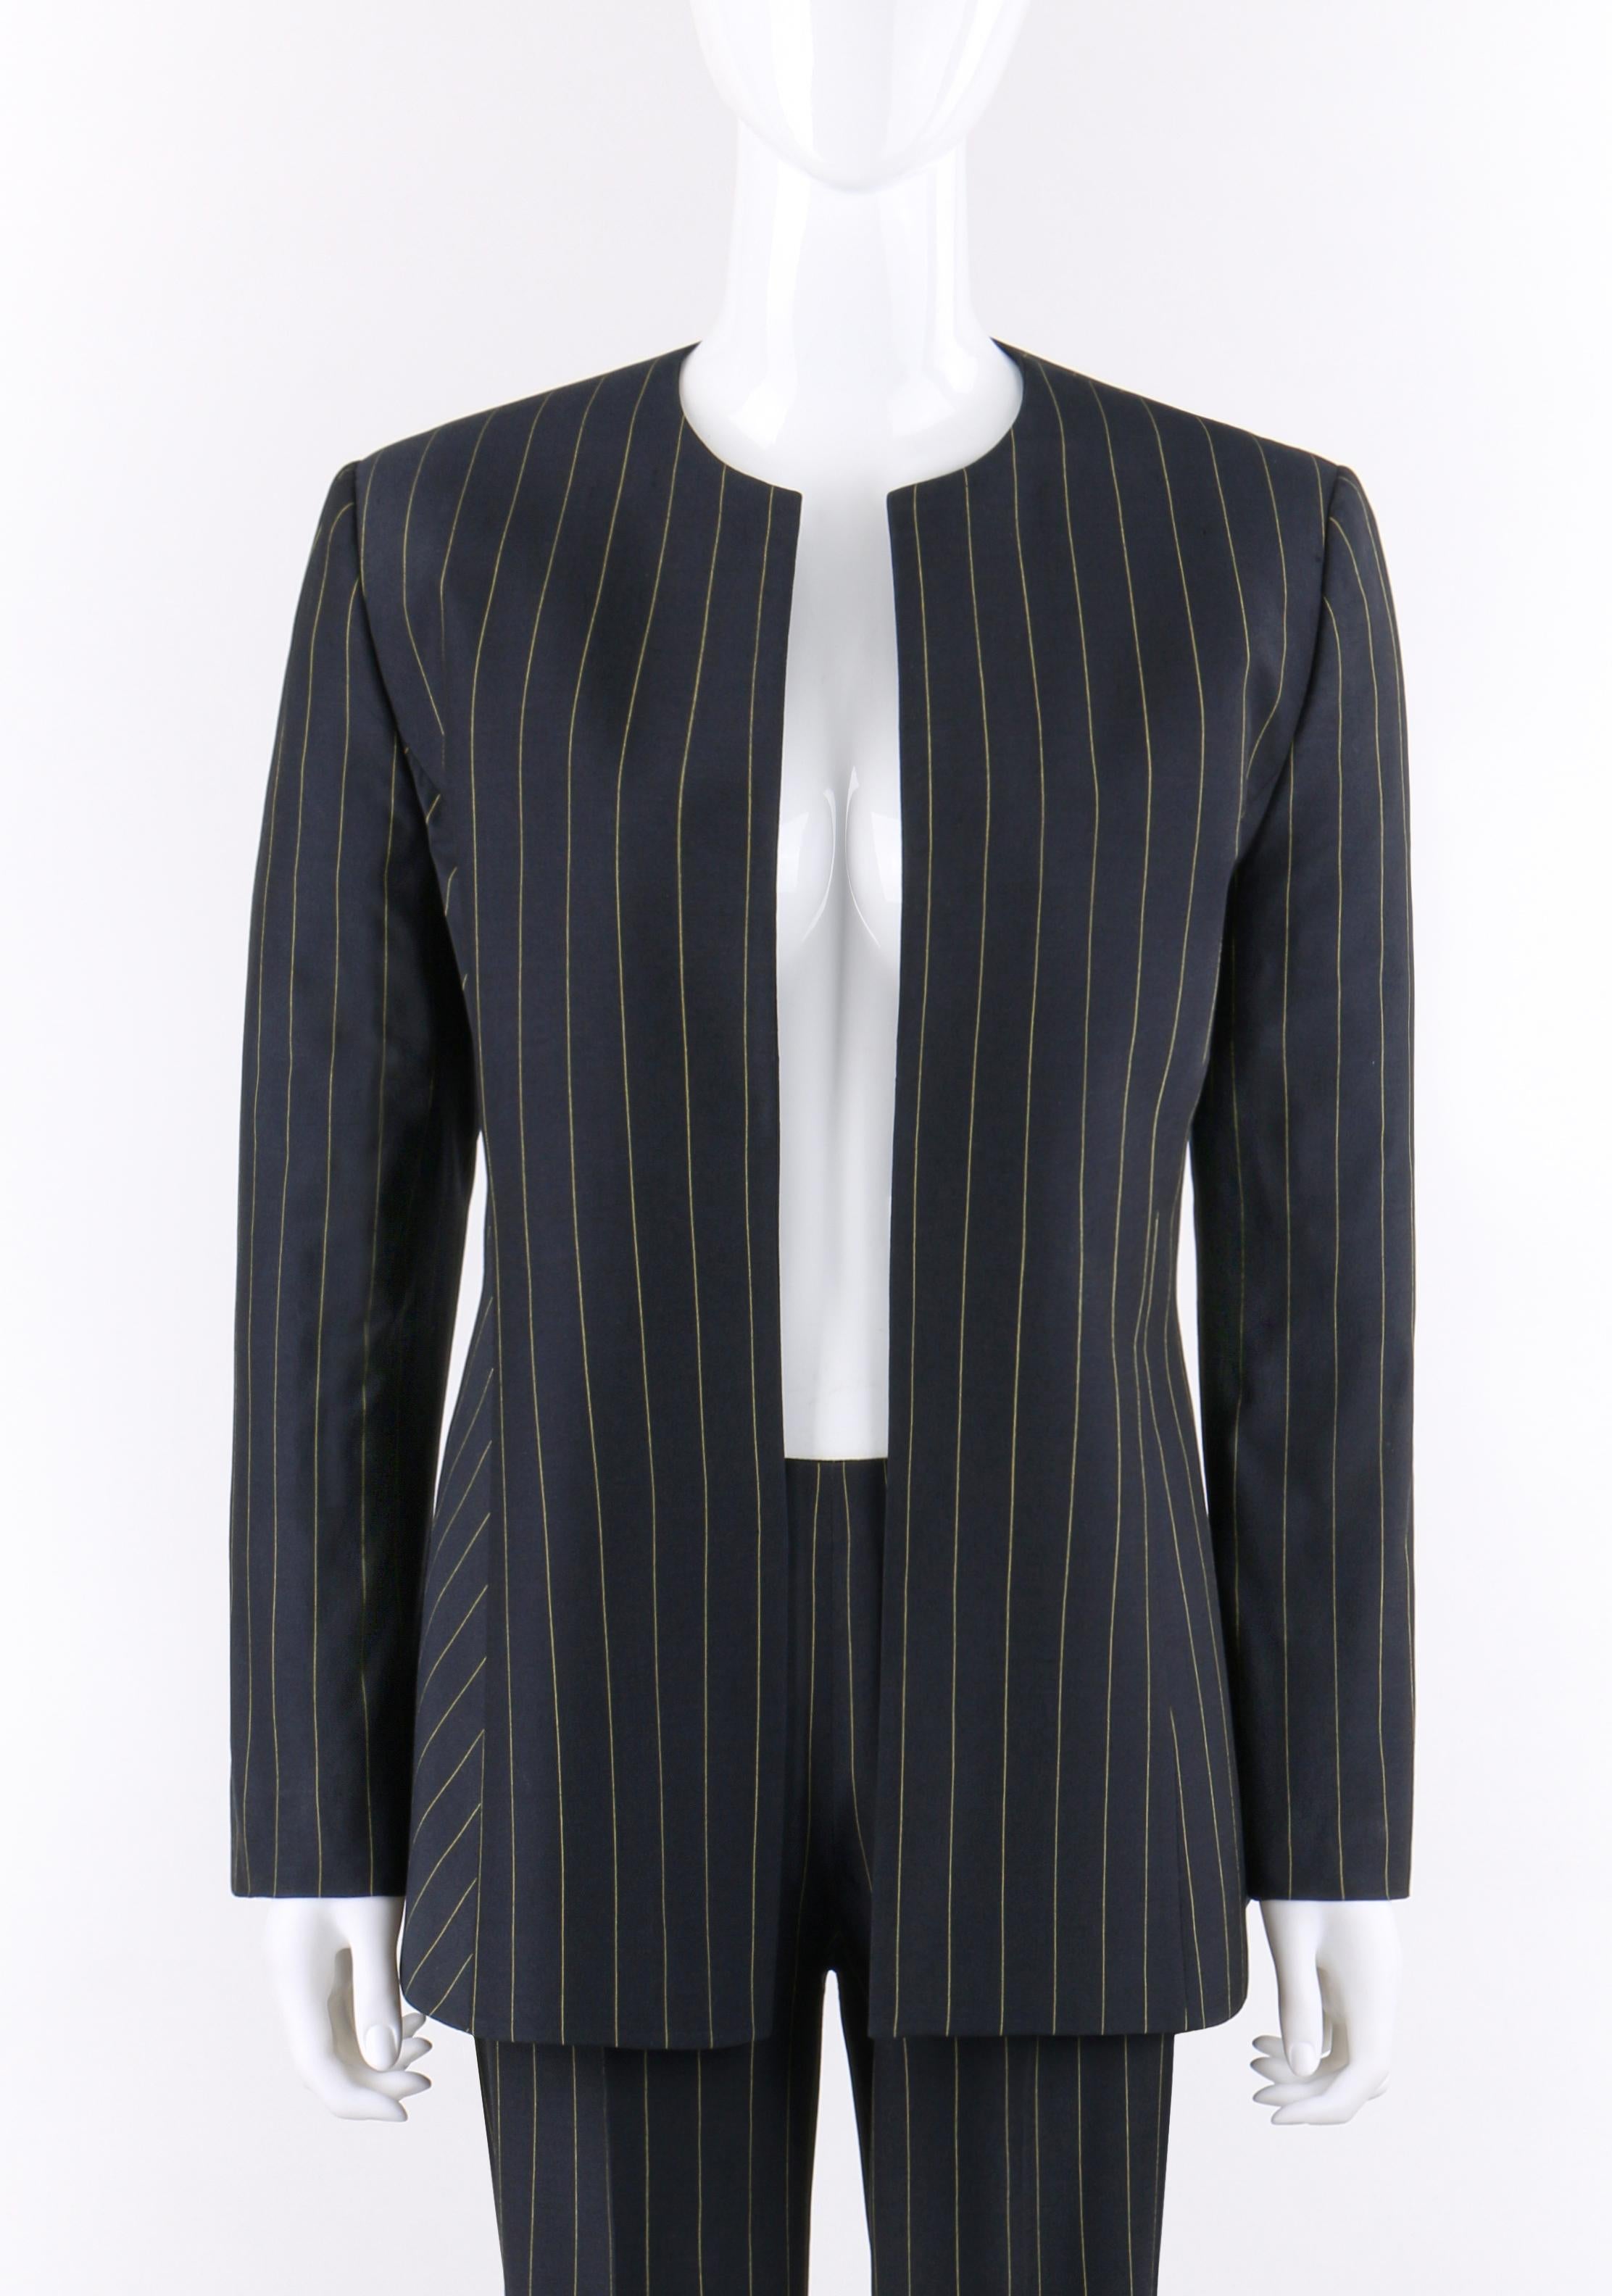 GIANNI VERSACE COUTURE c.1980's Navy Pinstripe Jacket Trouser Pant Suit Set

Circa: 1980’s
Label(s): Gianni Versace Couture
Designer: Gianni Versace
Style: Structured blazer jacket; creased straight-leg pants
Color(s): Dark navy blue with shades of